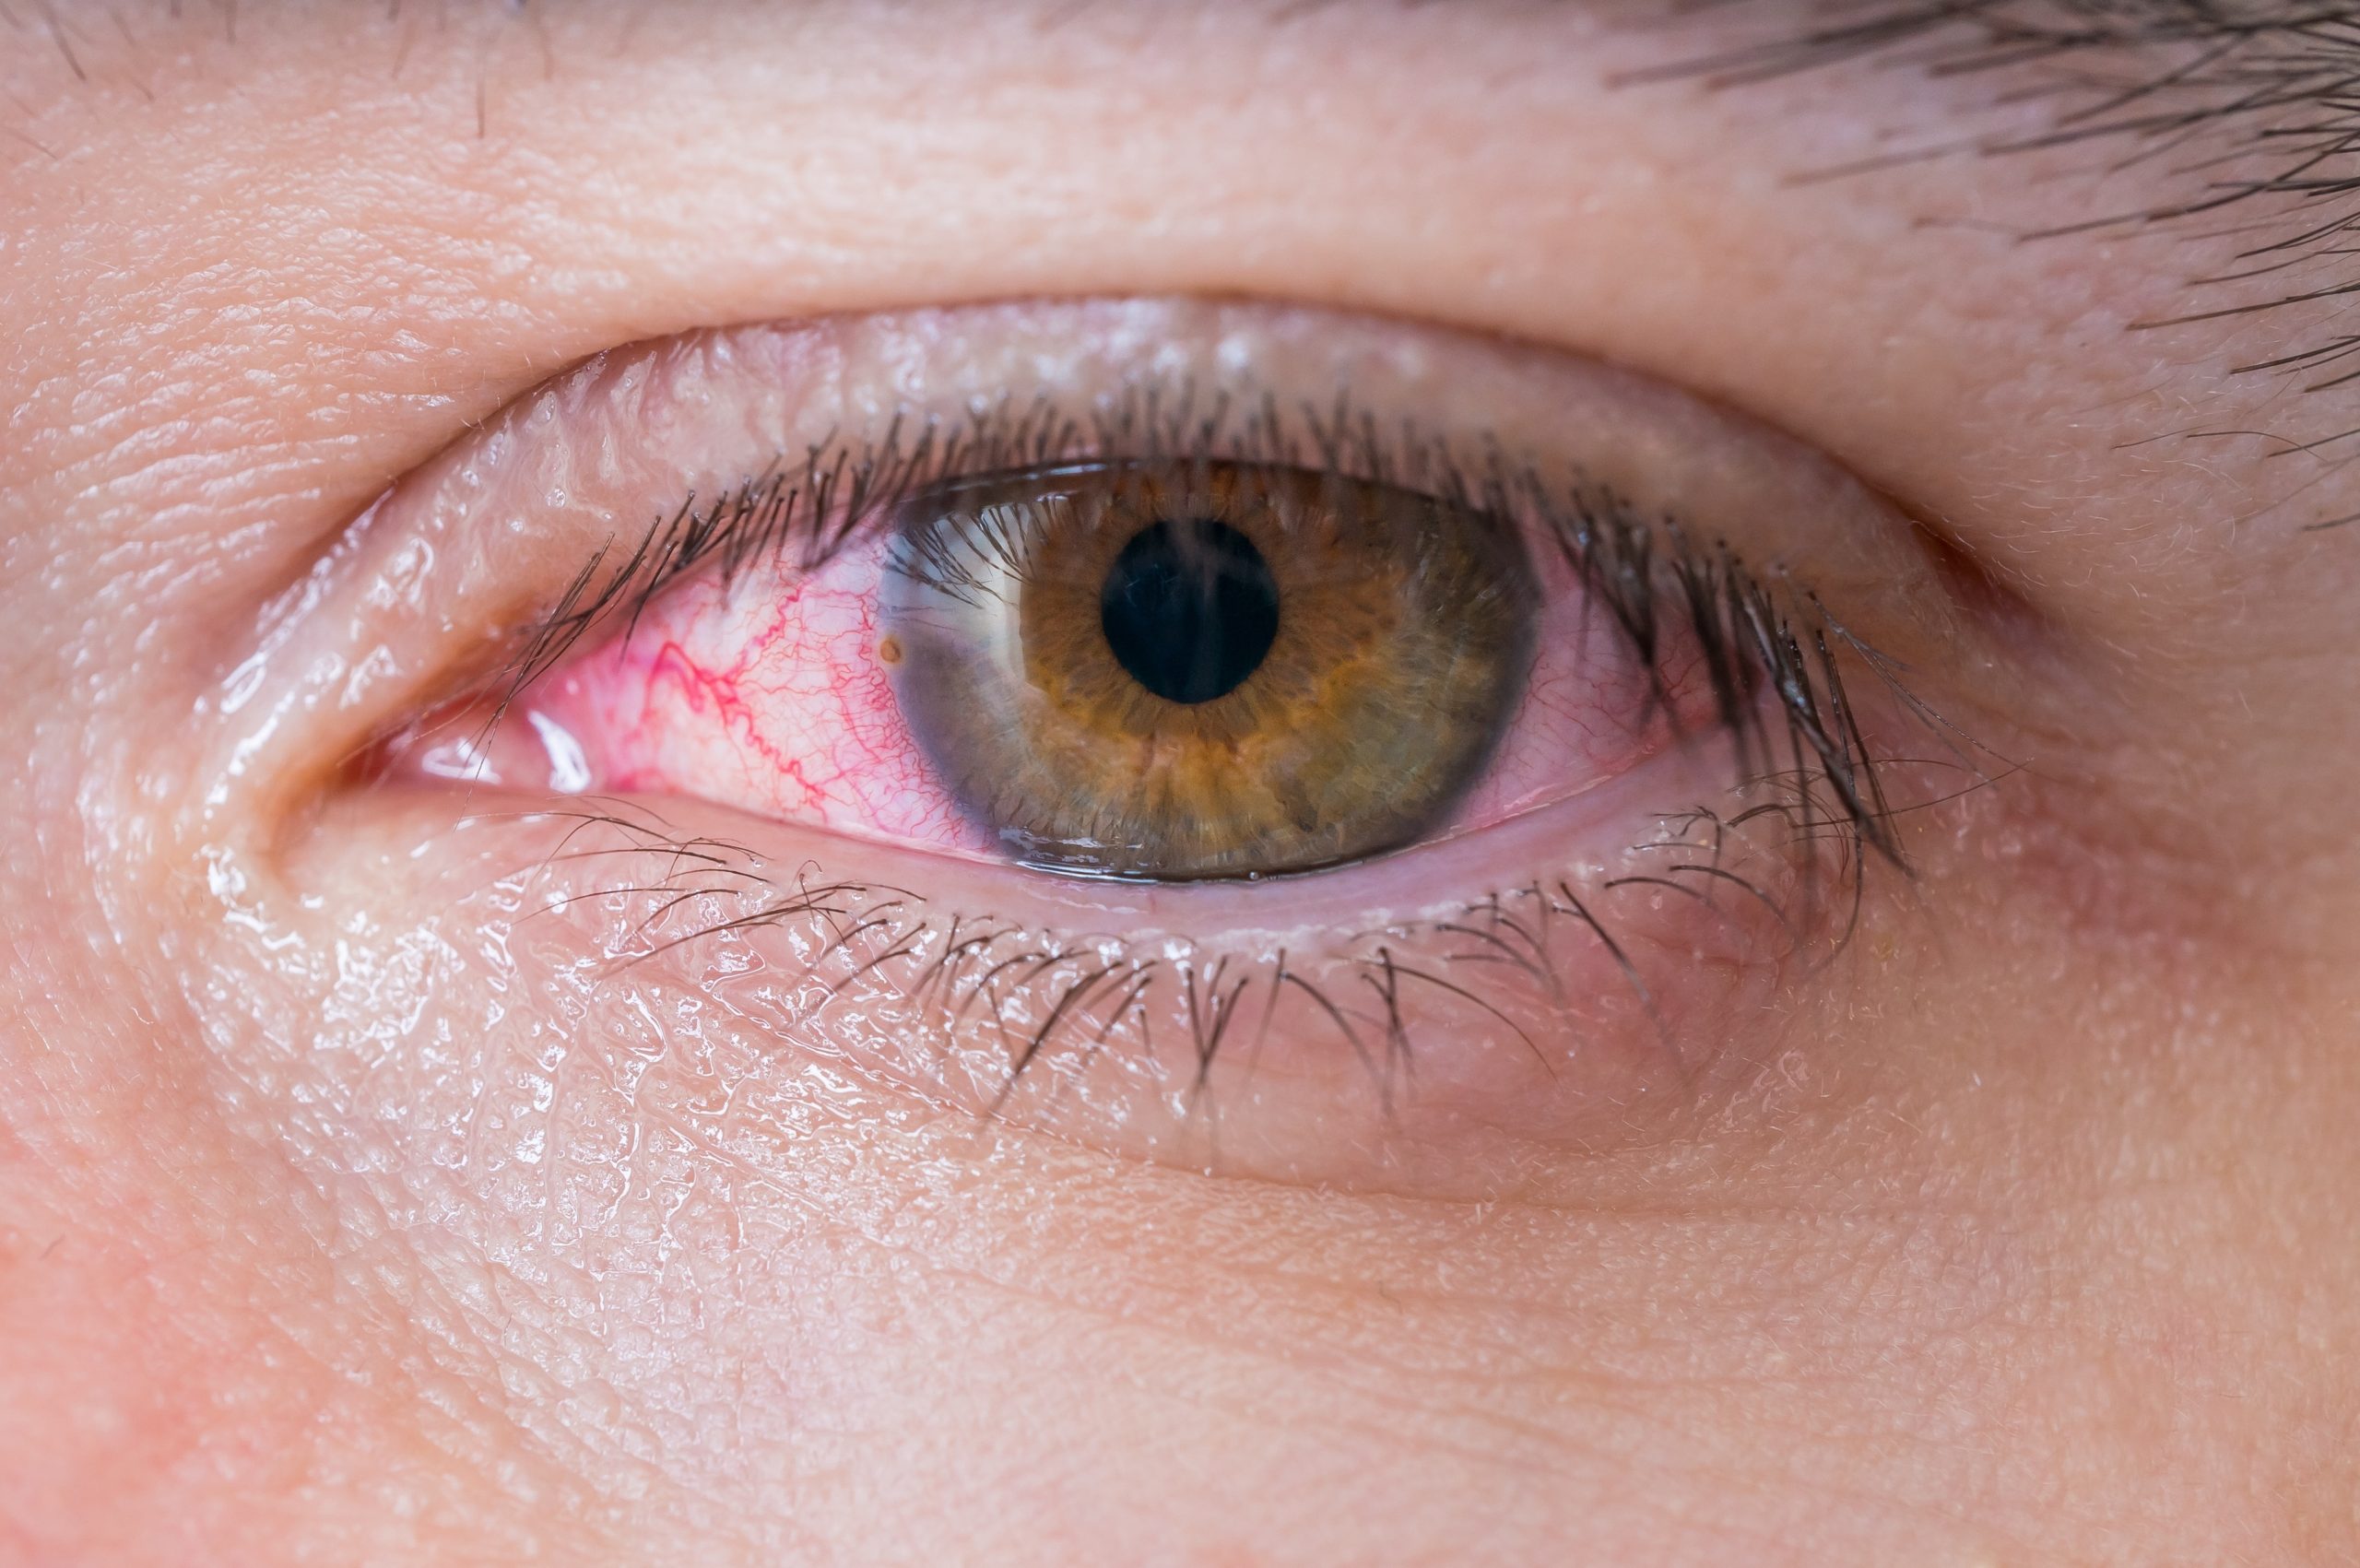 A close up of an eye with pink and red eyes